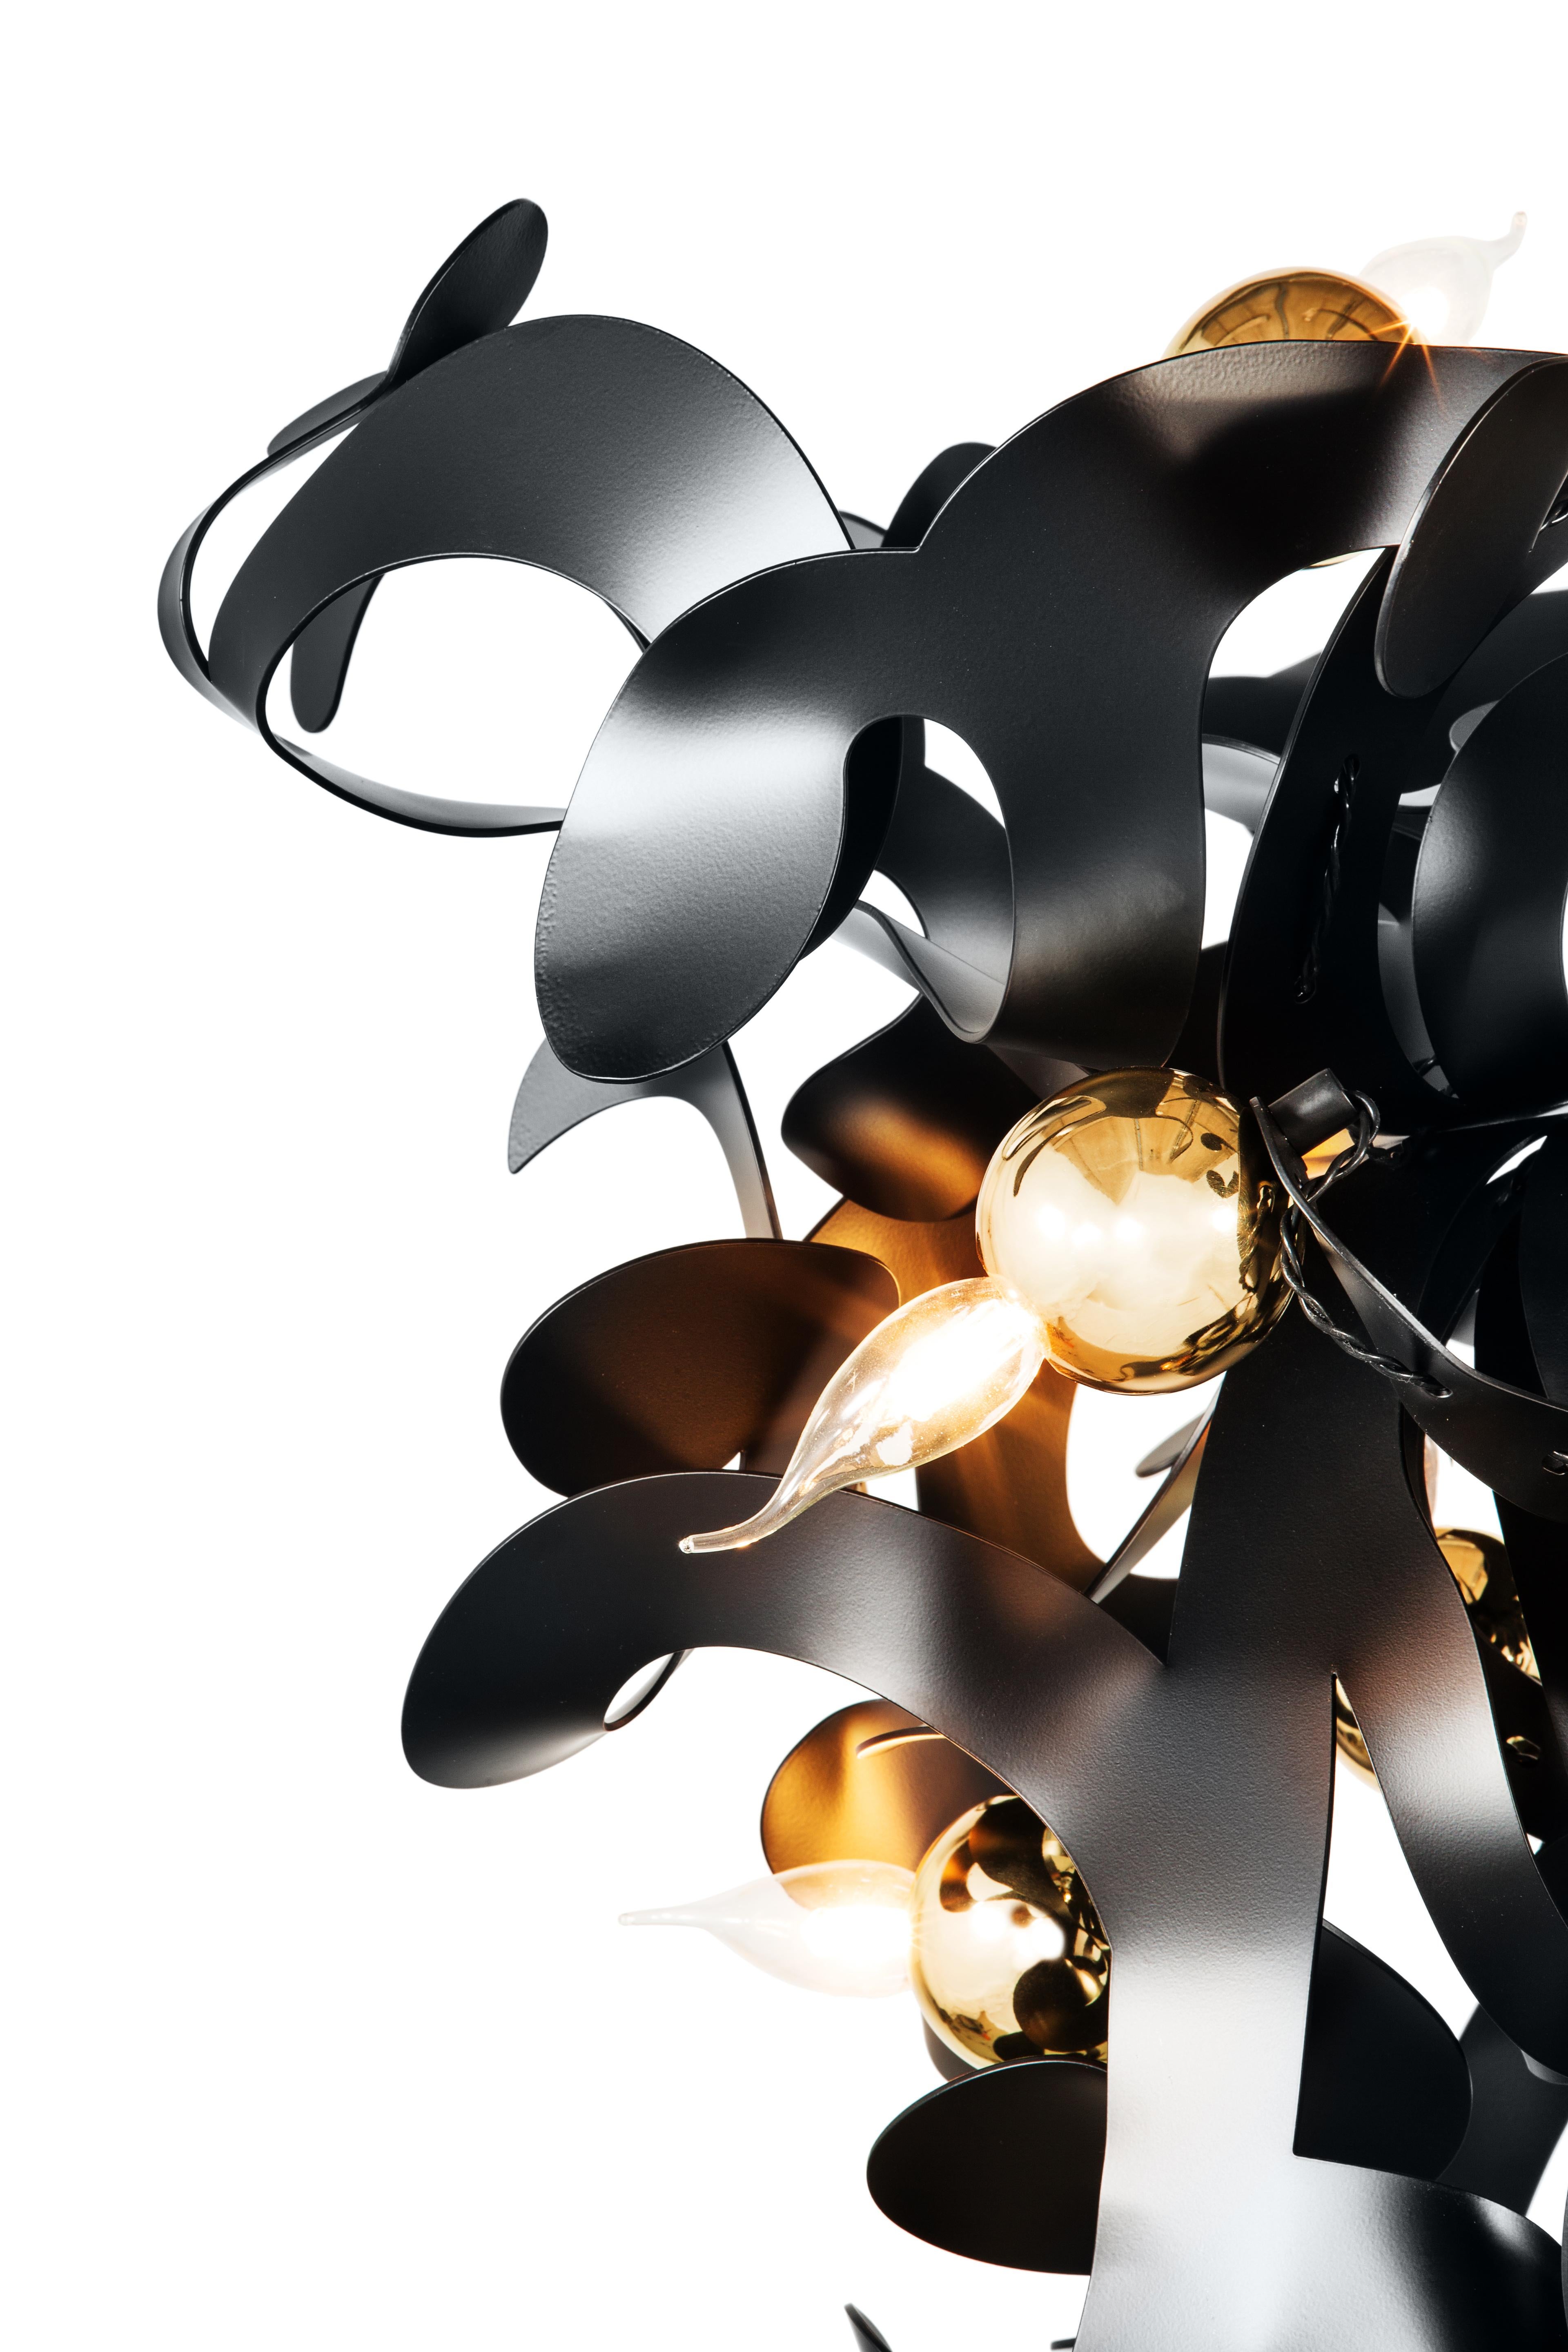 Designed by William Brand, this Kelp modern chandelier in a conical shape and in a black matt finish is bent by skilled craftsmen in graceful curls and shapes in the atelier of Brand van Egmond. The playful and organic form of the Kelp offers